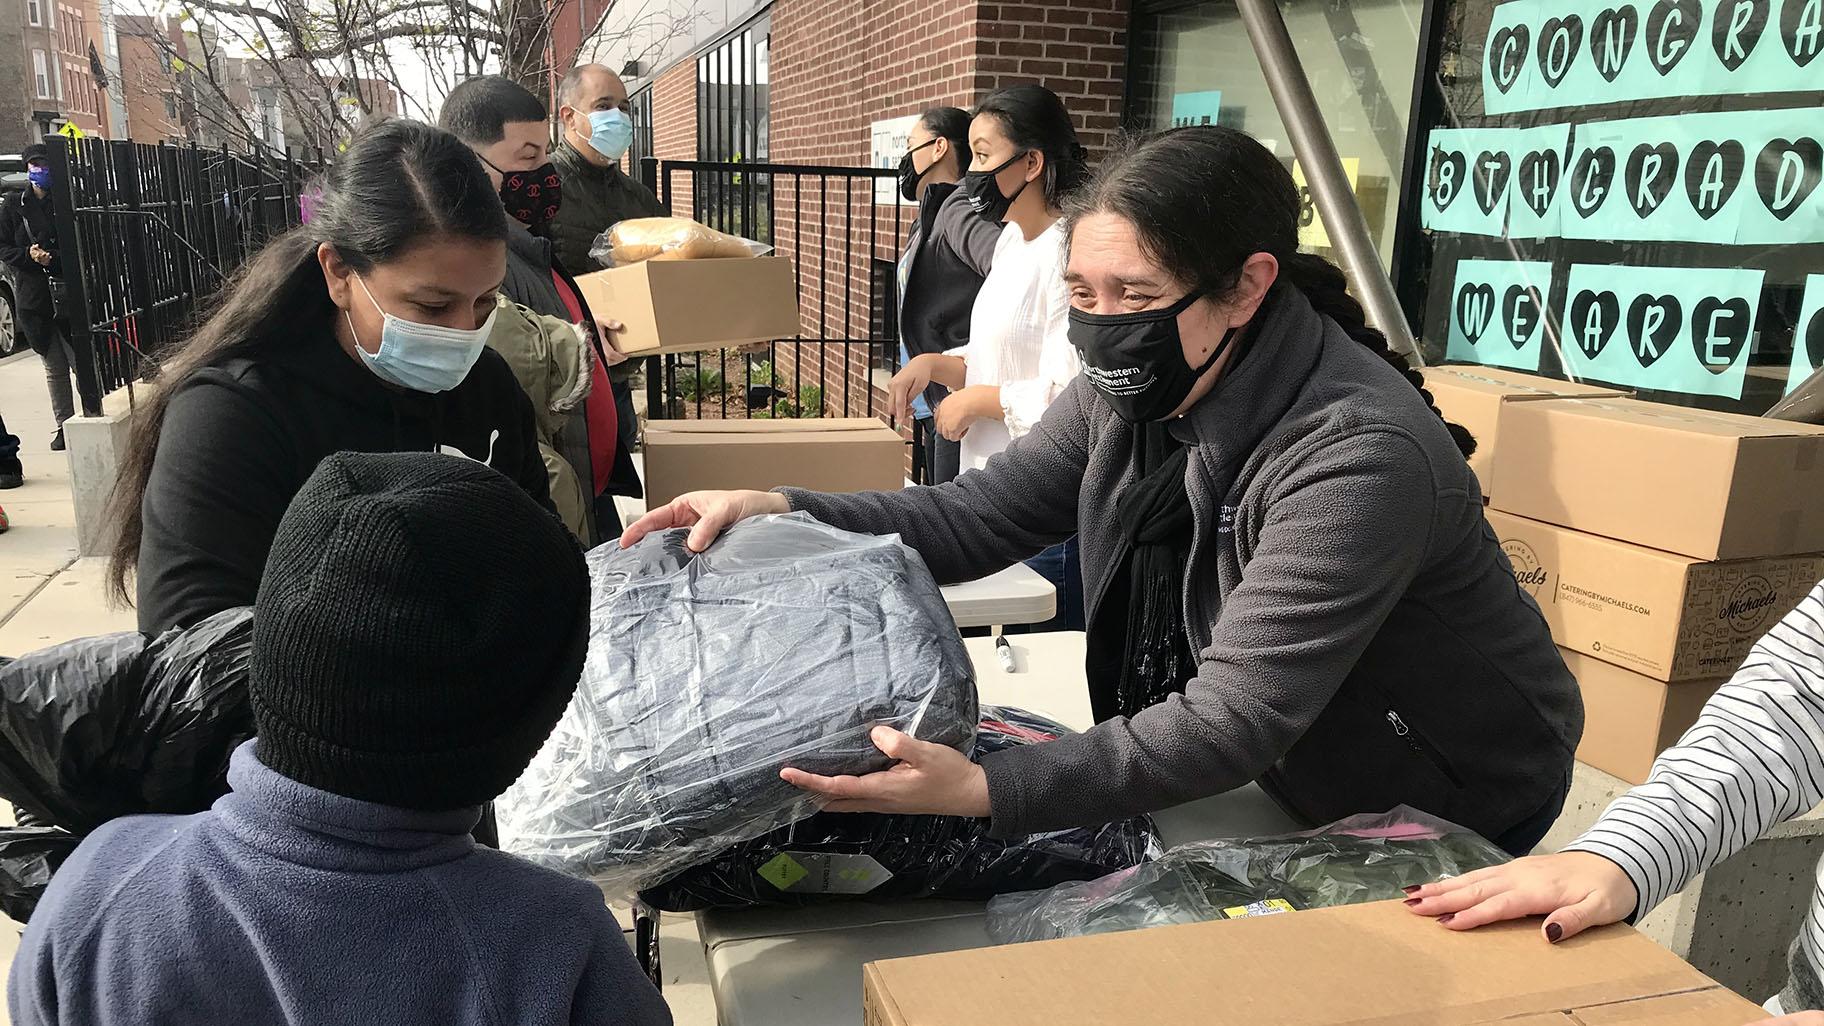 Families pick up Thanksgiving meal boxes and coats for their children at West Town nonprofit Northwestern Settlement on Saturday, Nov. 21, 2020. (Ariel Parrella-Aureli / WTTW News)